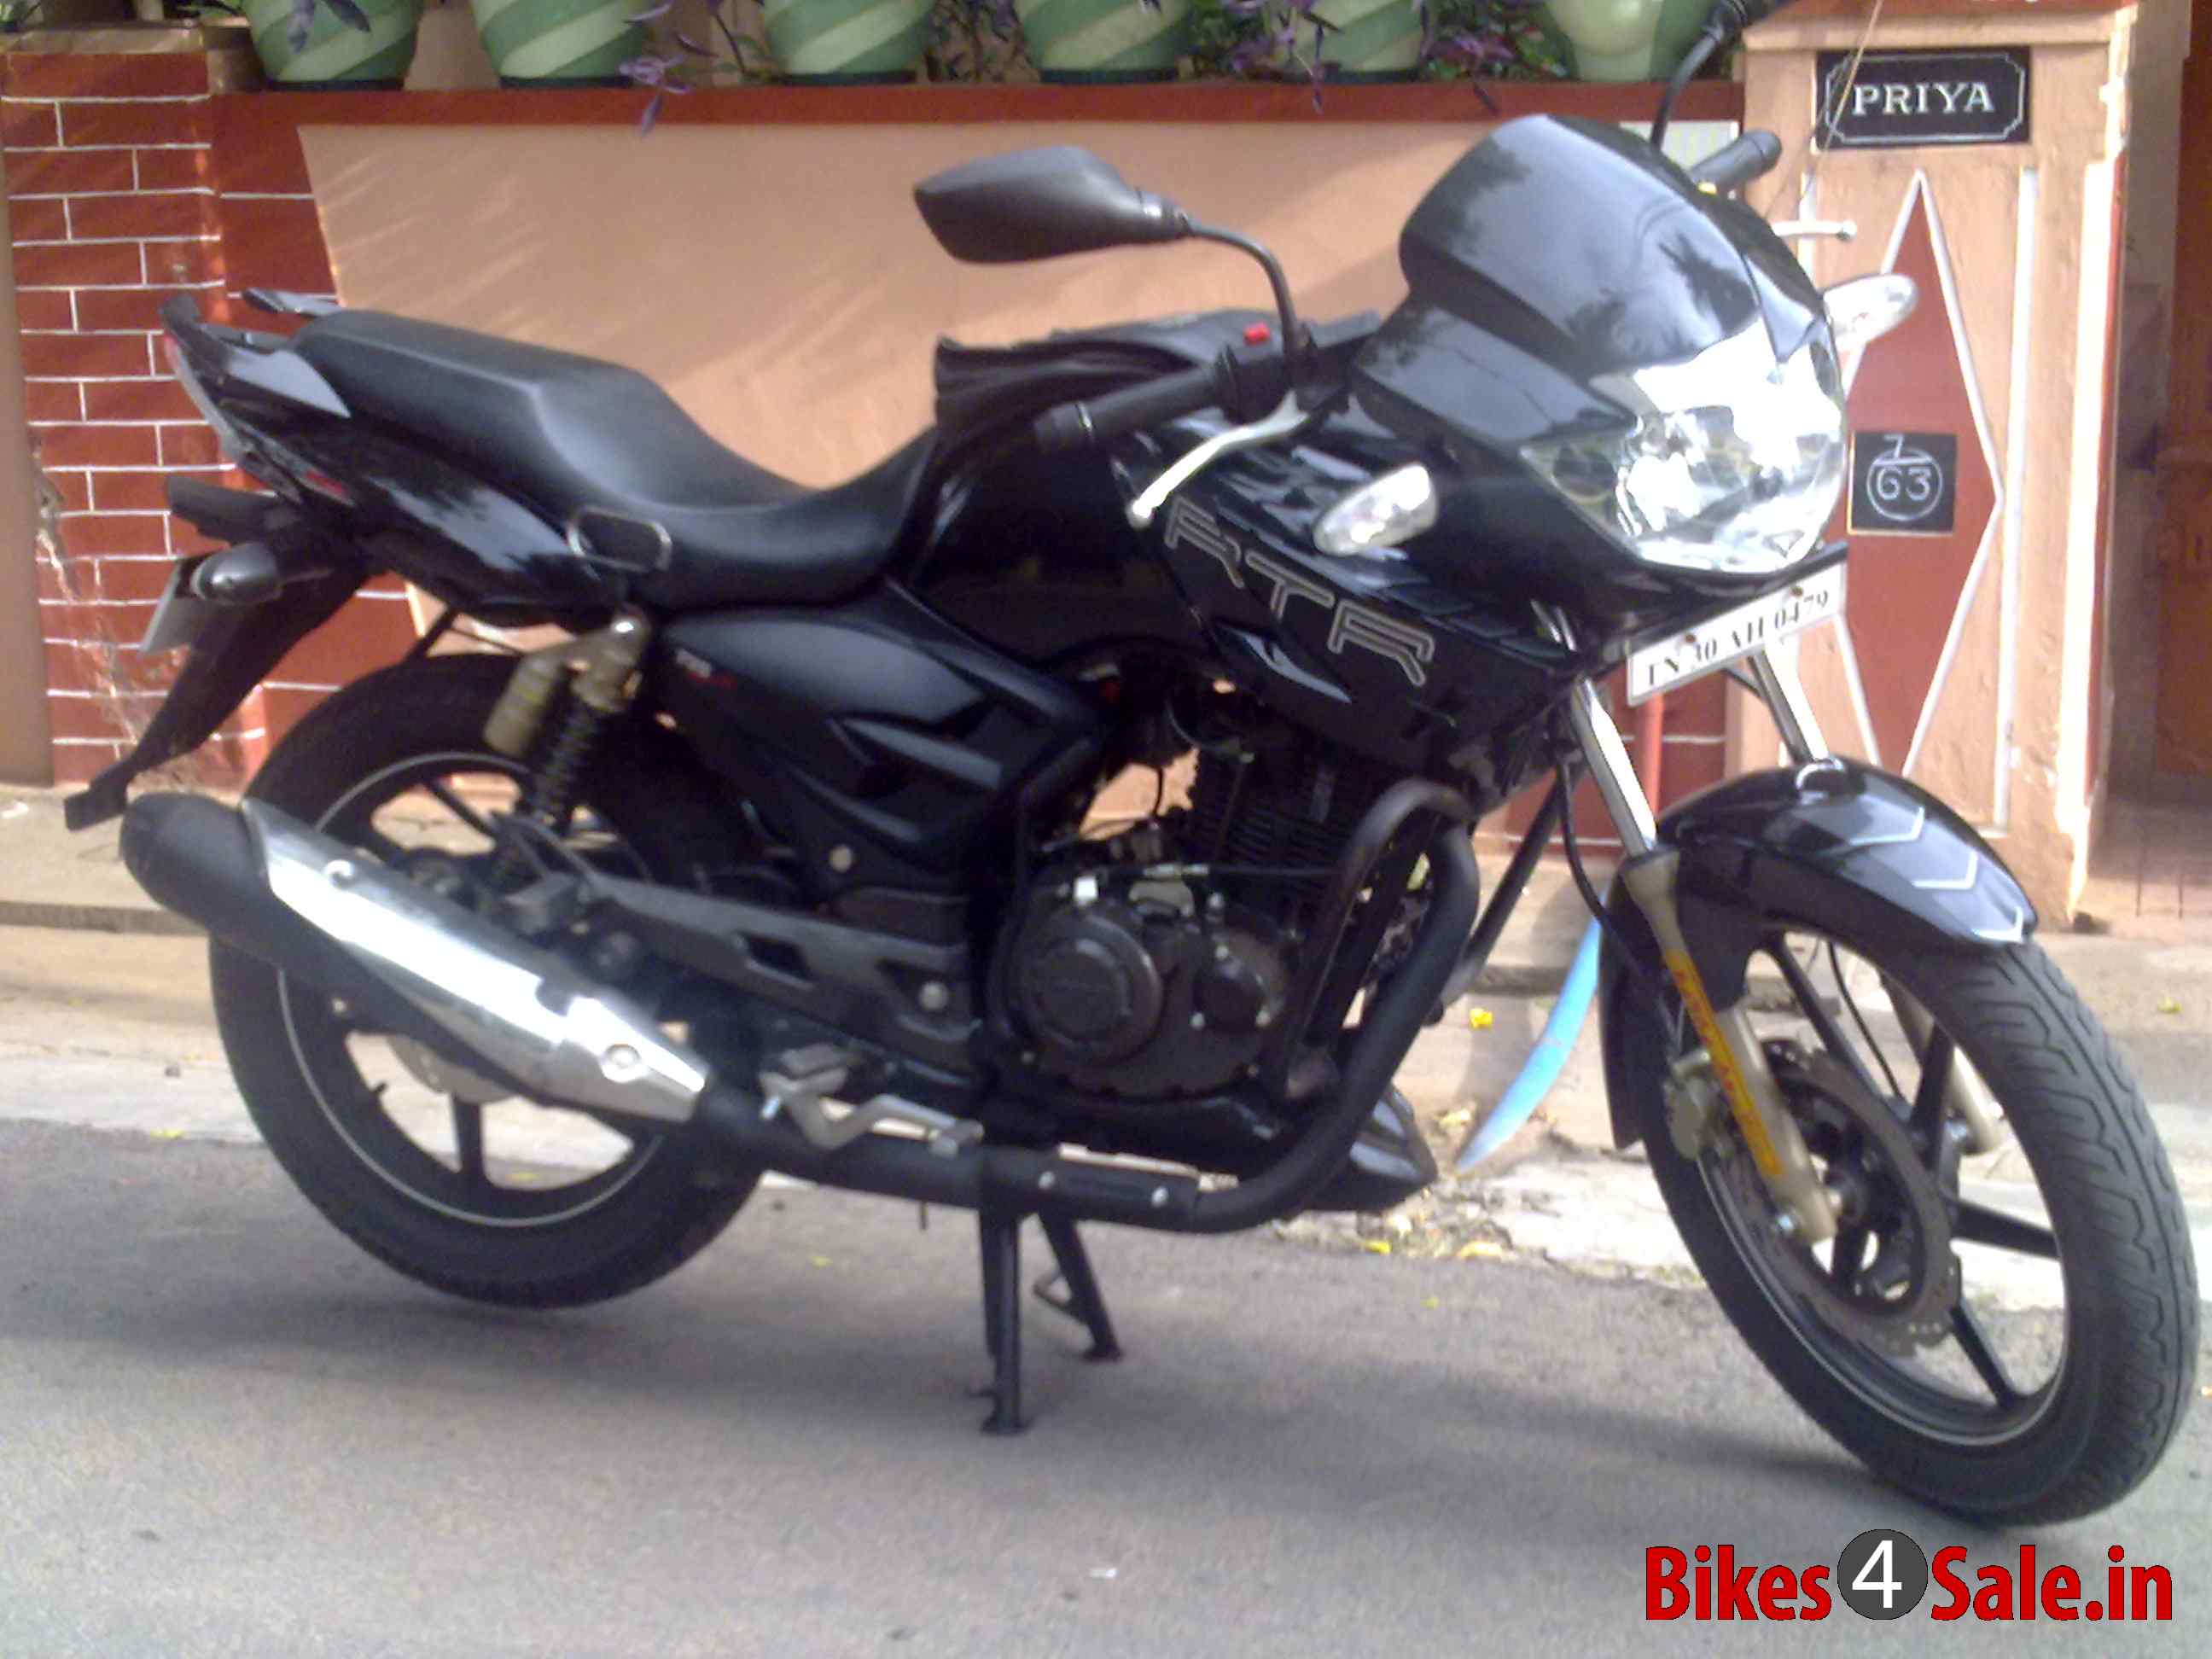 2010 Tvs Apache Rtr 180 Specs Images And Pricing